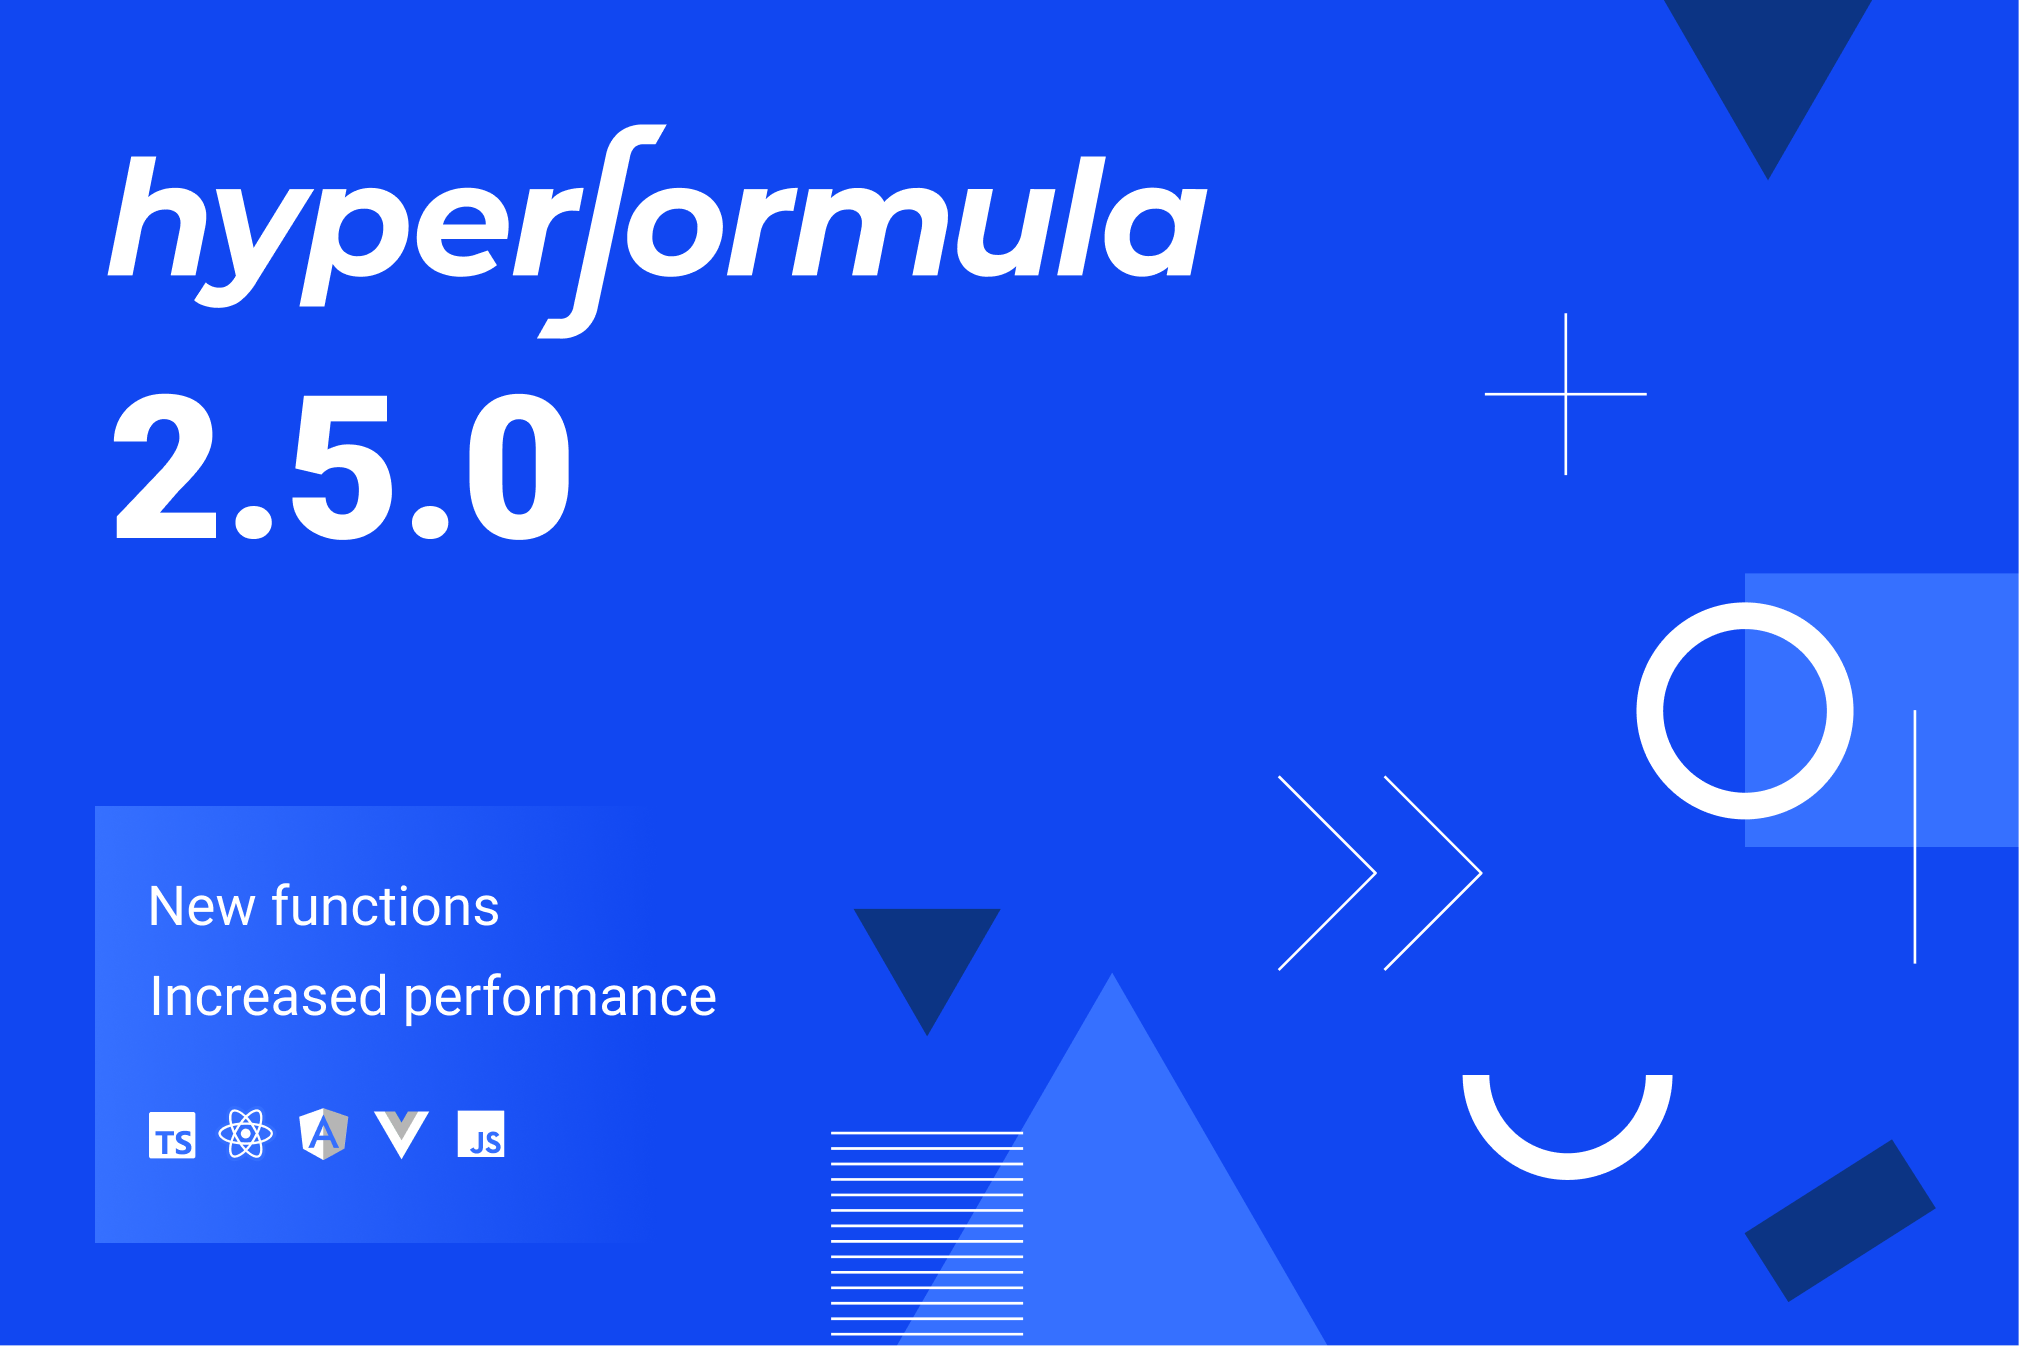 Illustration for blog post - HyperFormula 2.5.0: New functions and performance improvements